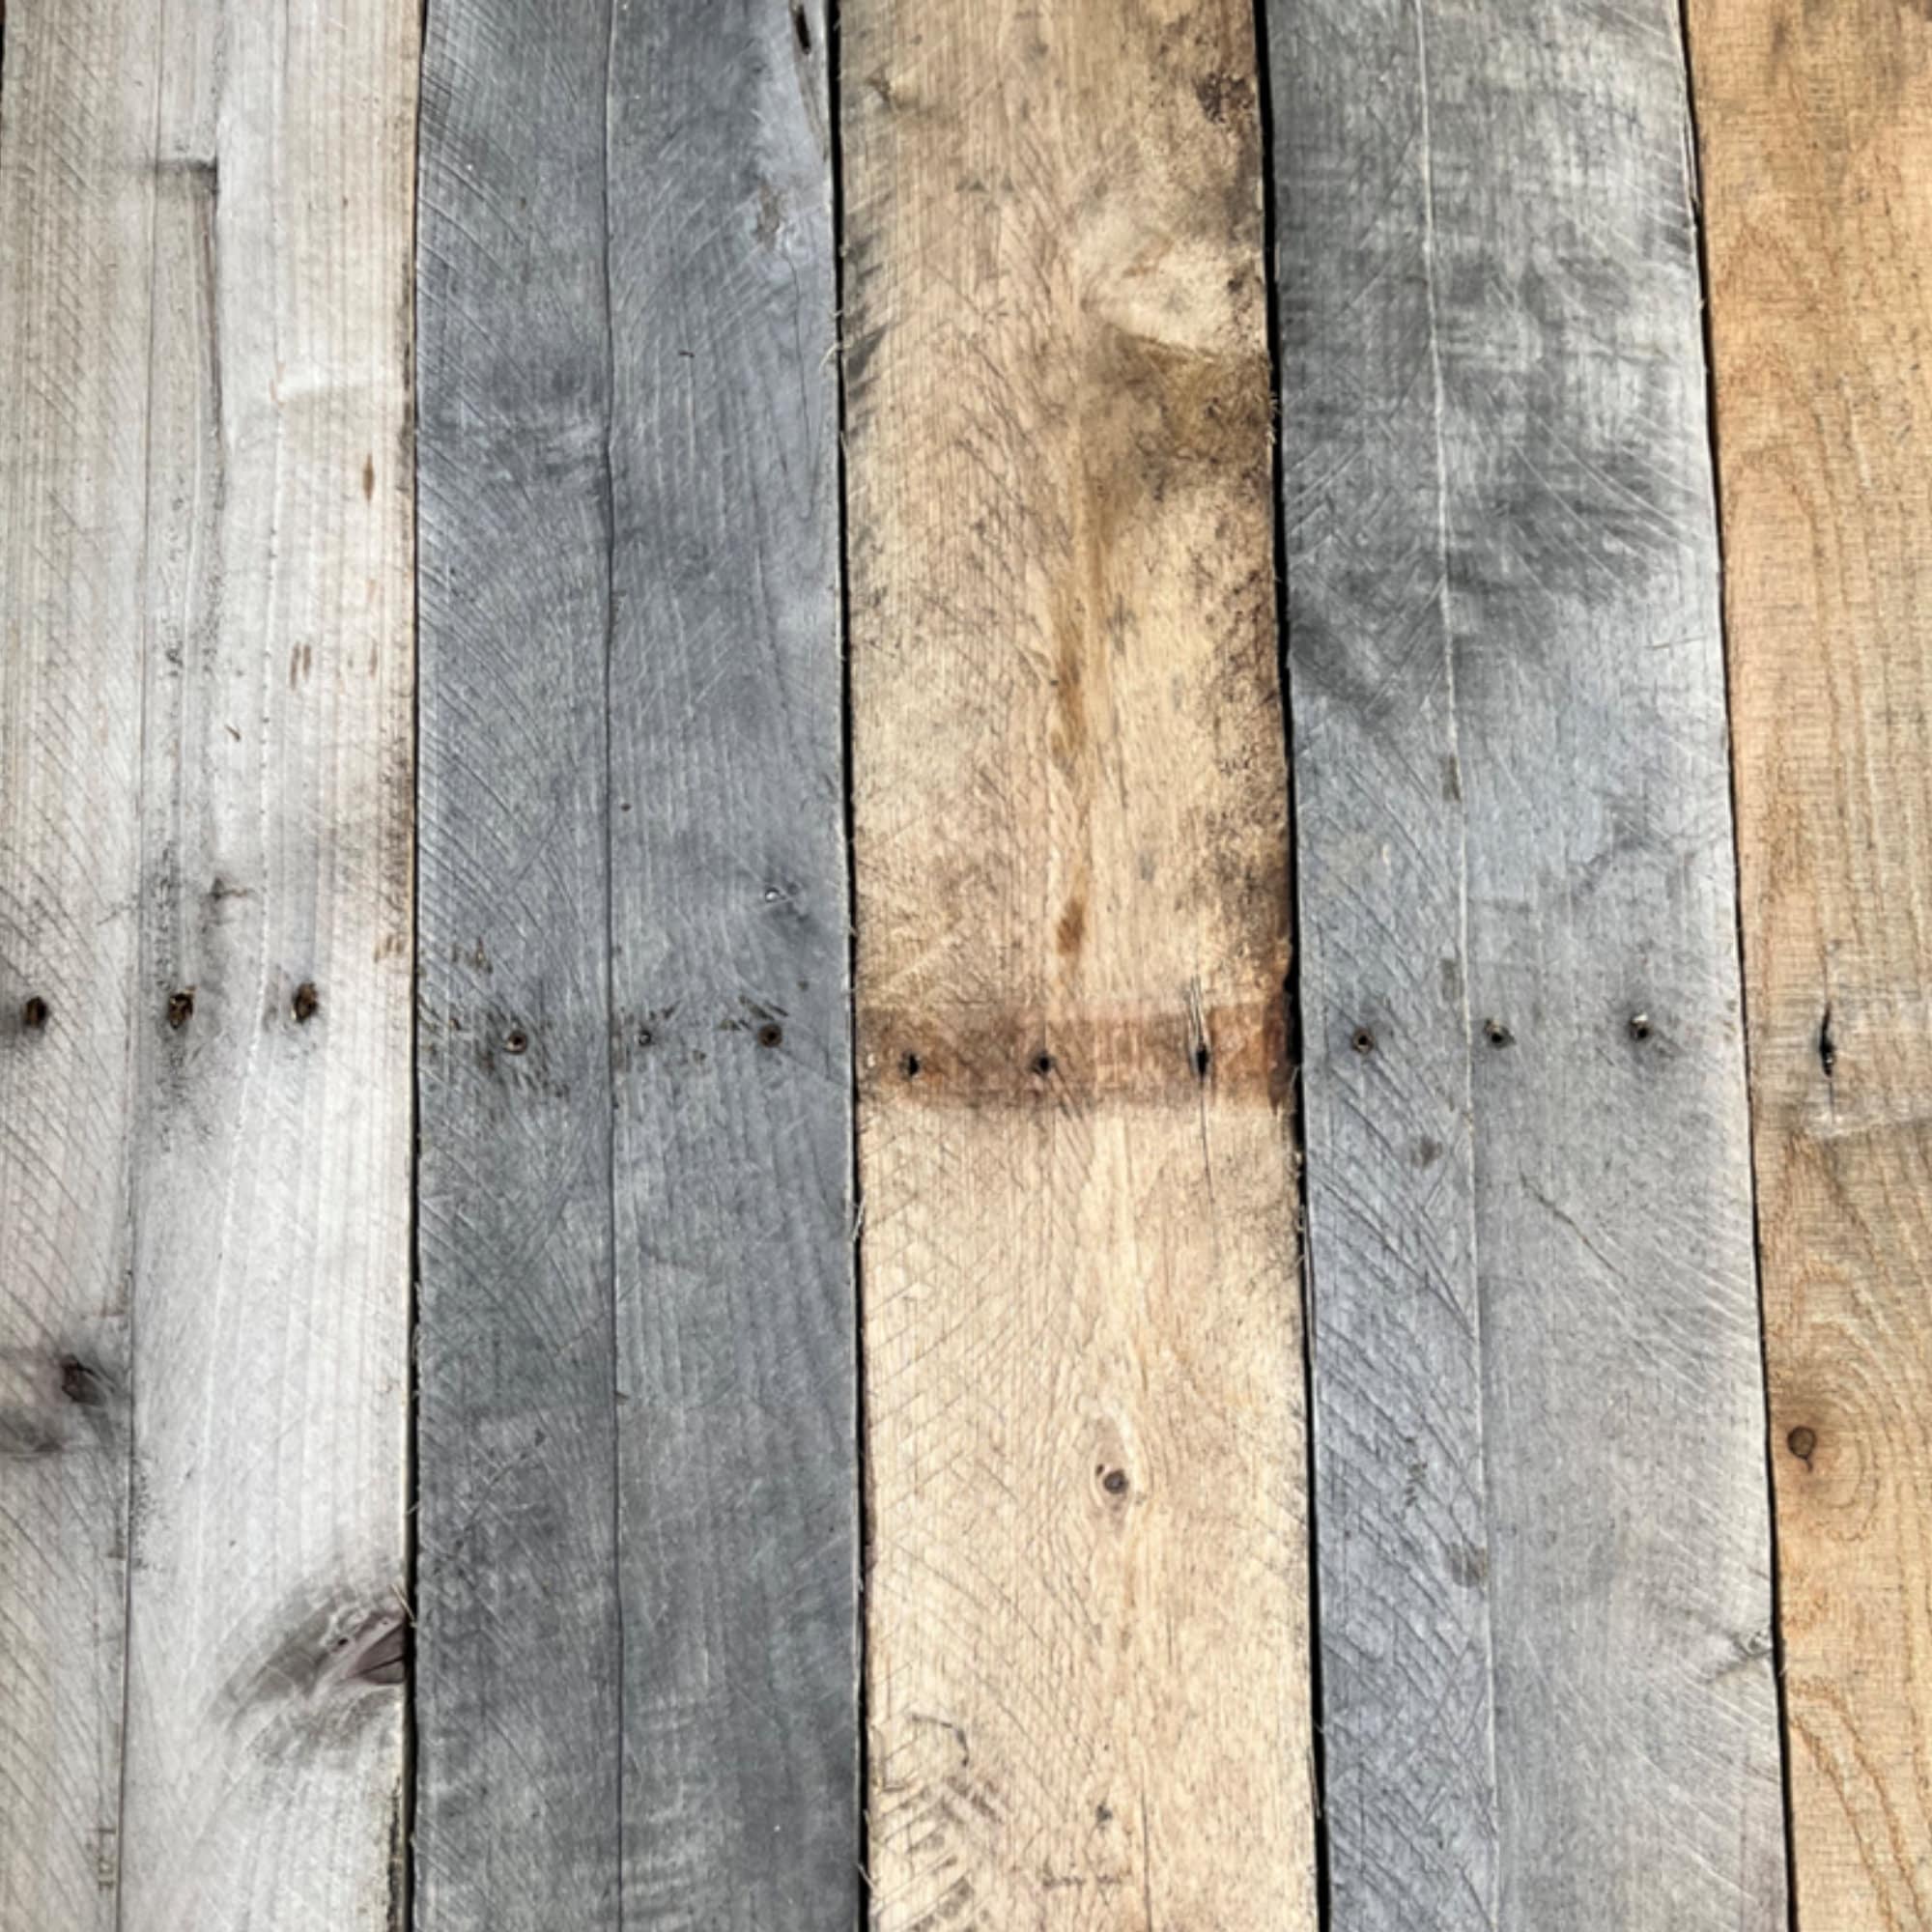 Set of 2 Rustic Wooden Planks, Reclaimed Wood, Raw Wood With Bark, Wooden  Board, Wood Diy Project, Wooden Material, Wood Plank With Bark 